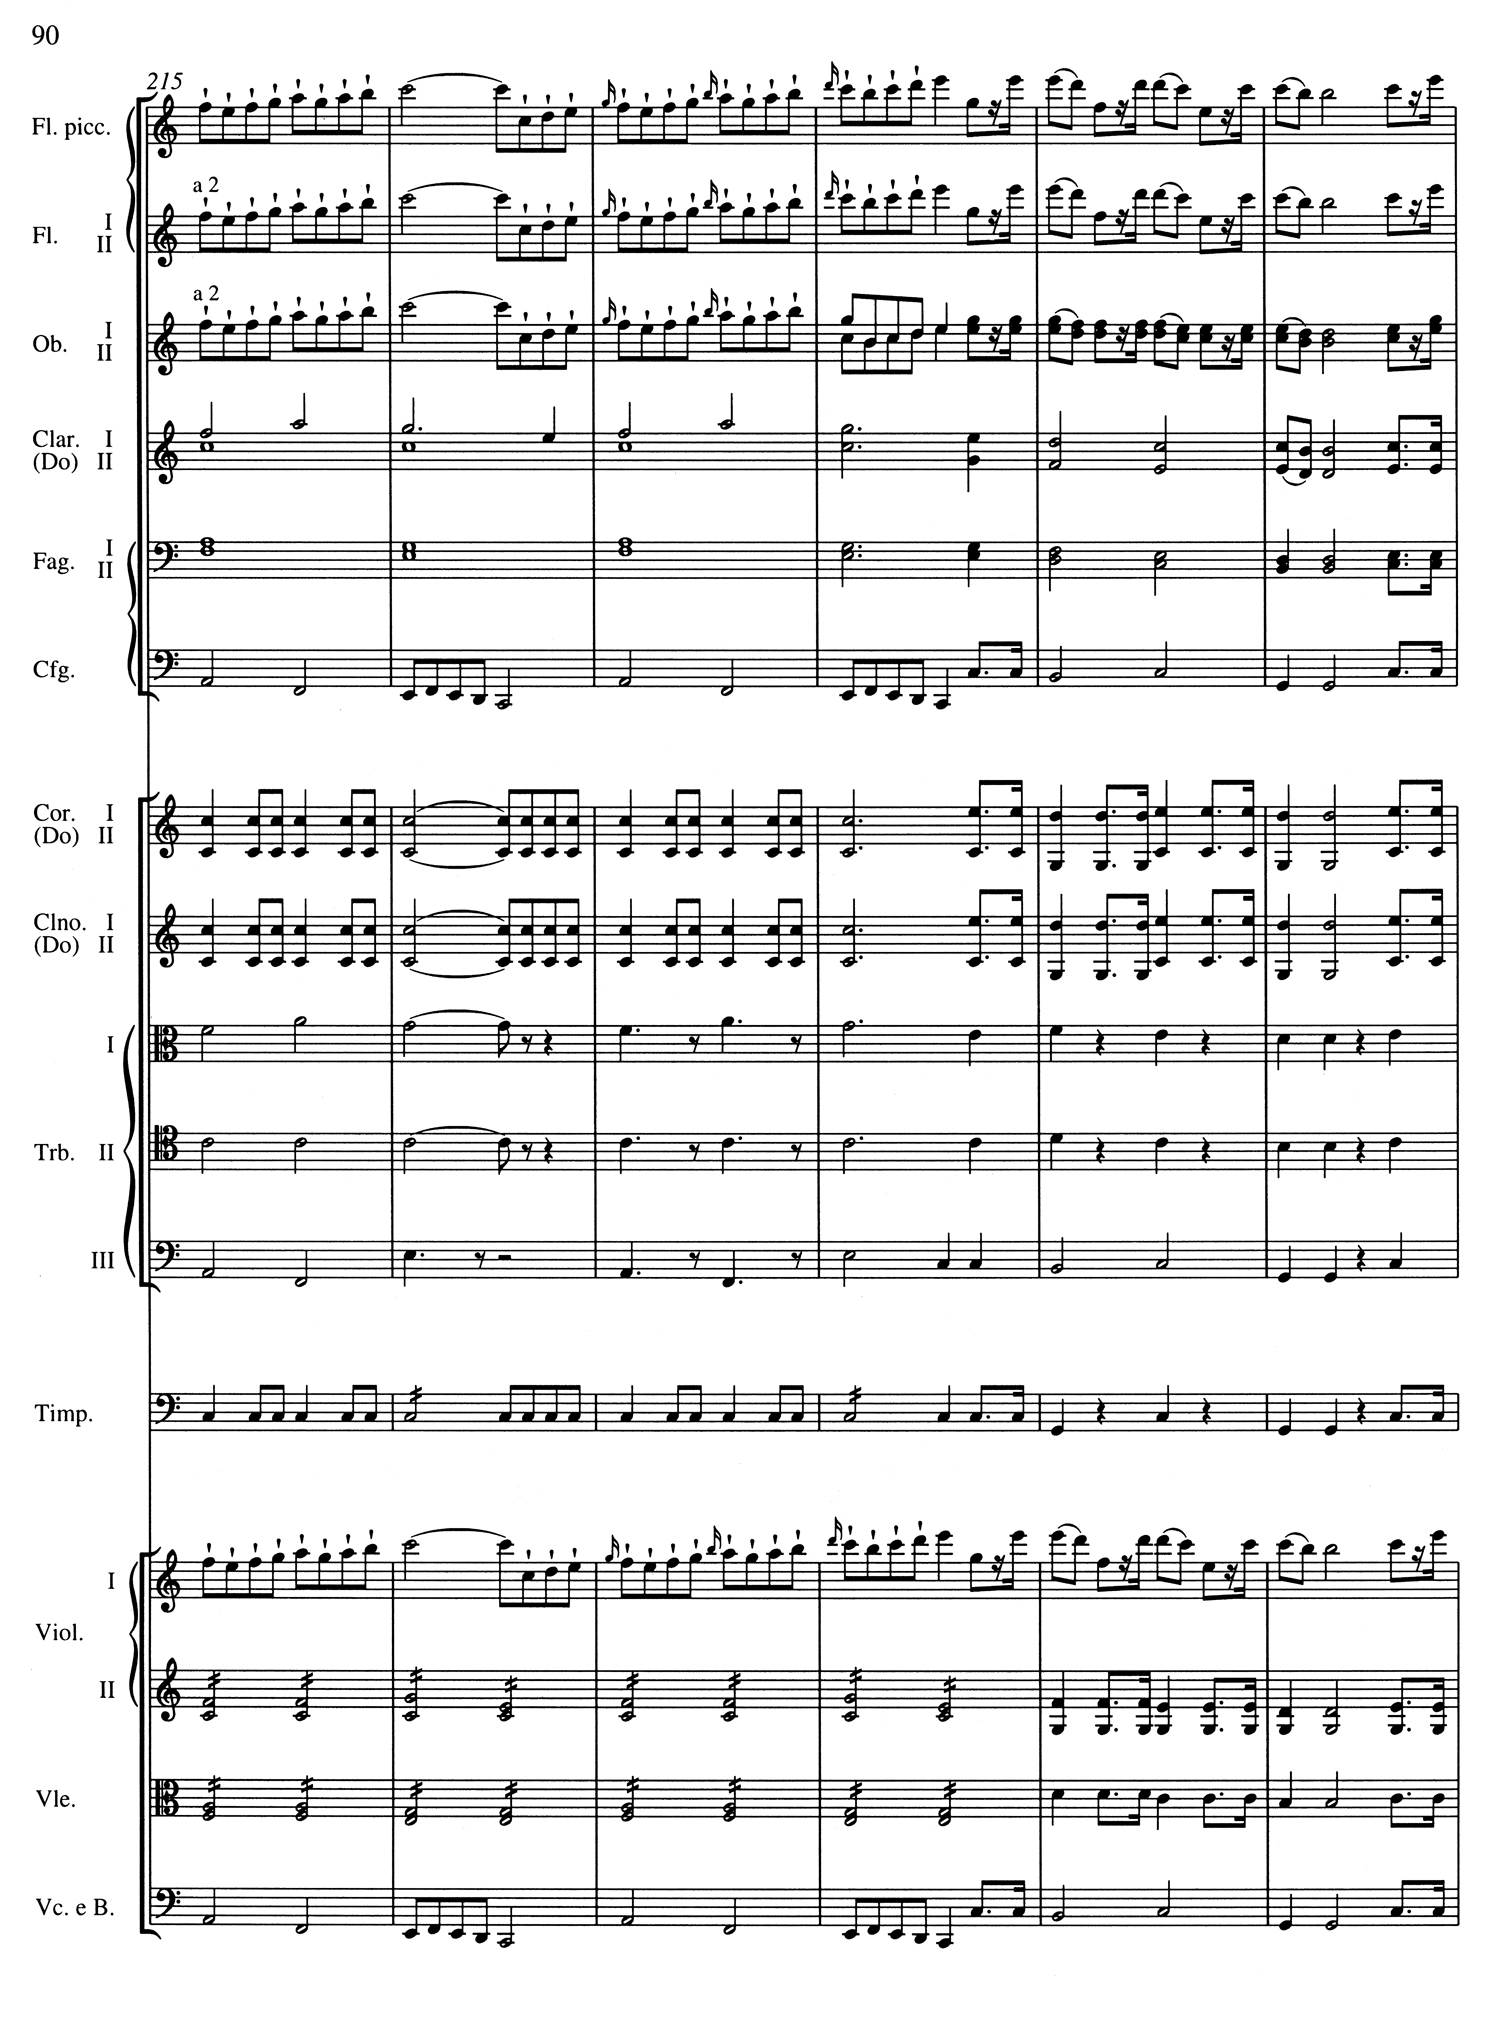 Beethoven 5 Score Page 2.jpg